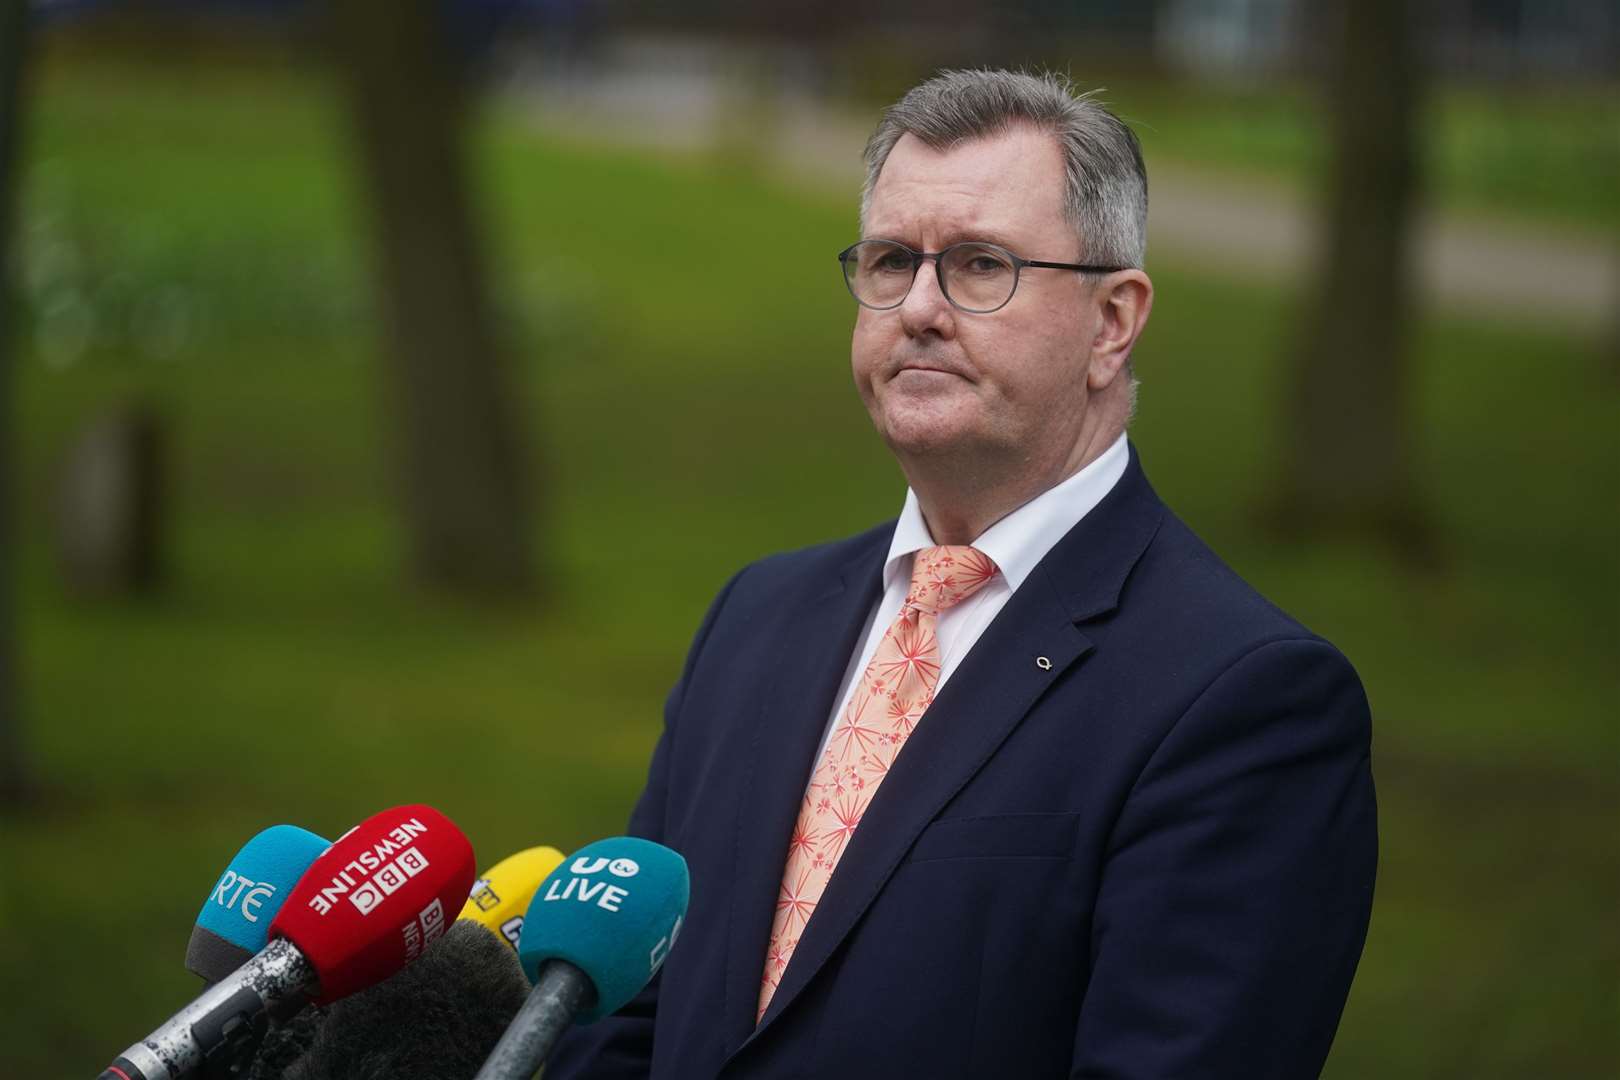 DUP leader Sir Jeffrey Donaldson said progress had been made between the EU and the UK over the protocol (Brian Lawless/PA)